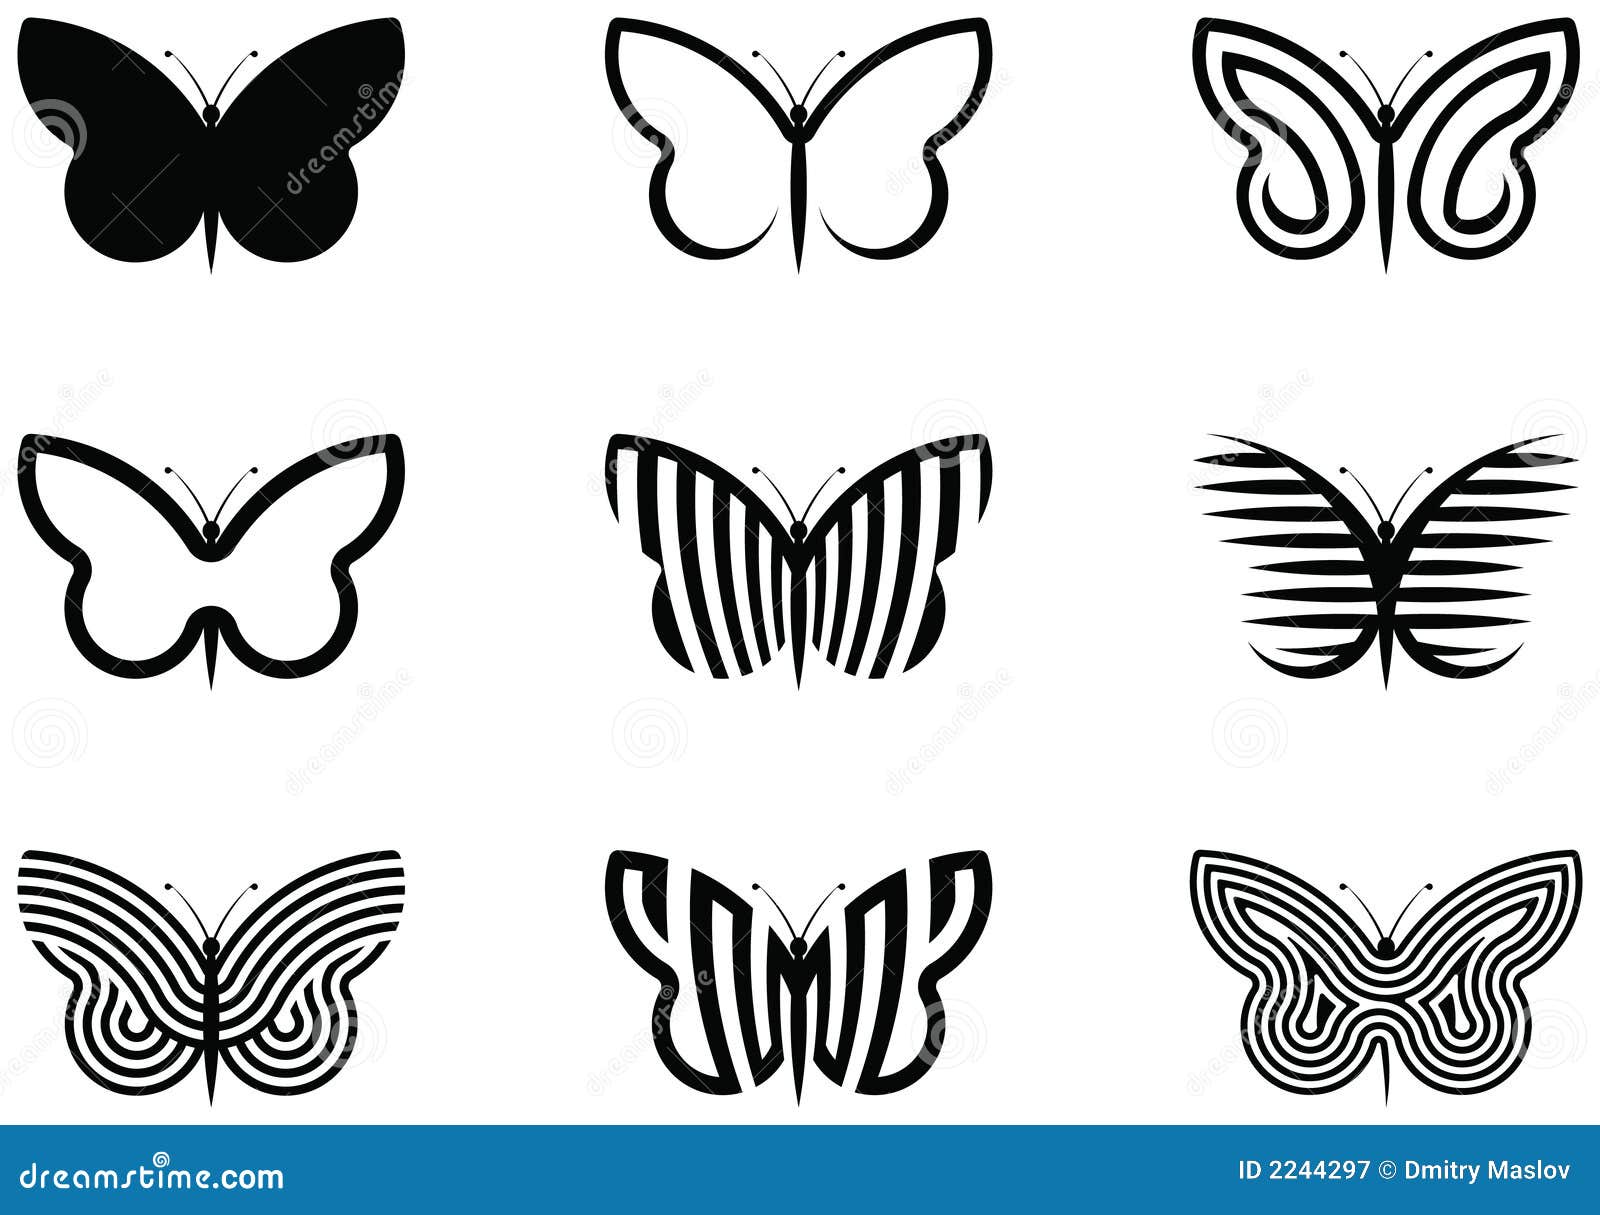 Download Butterflies Royalty Free Stock Photography - Image: 2244297